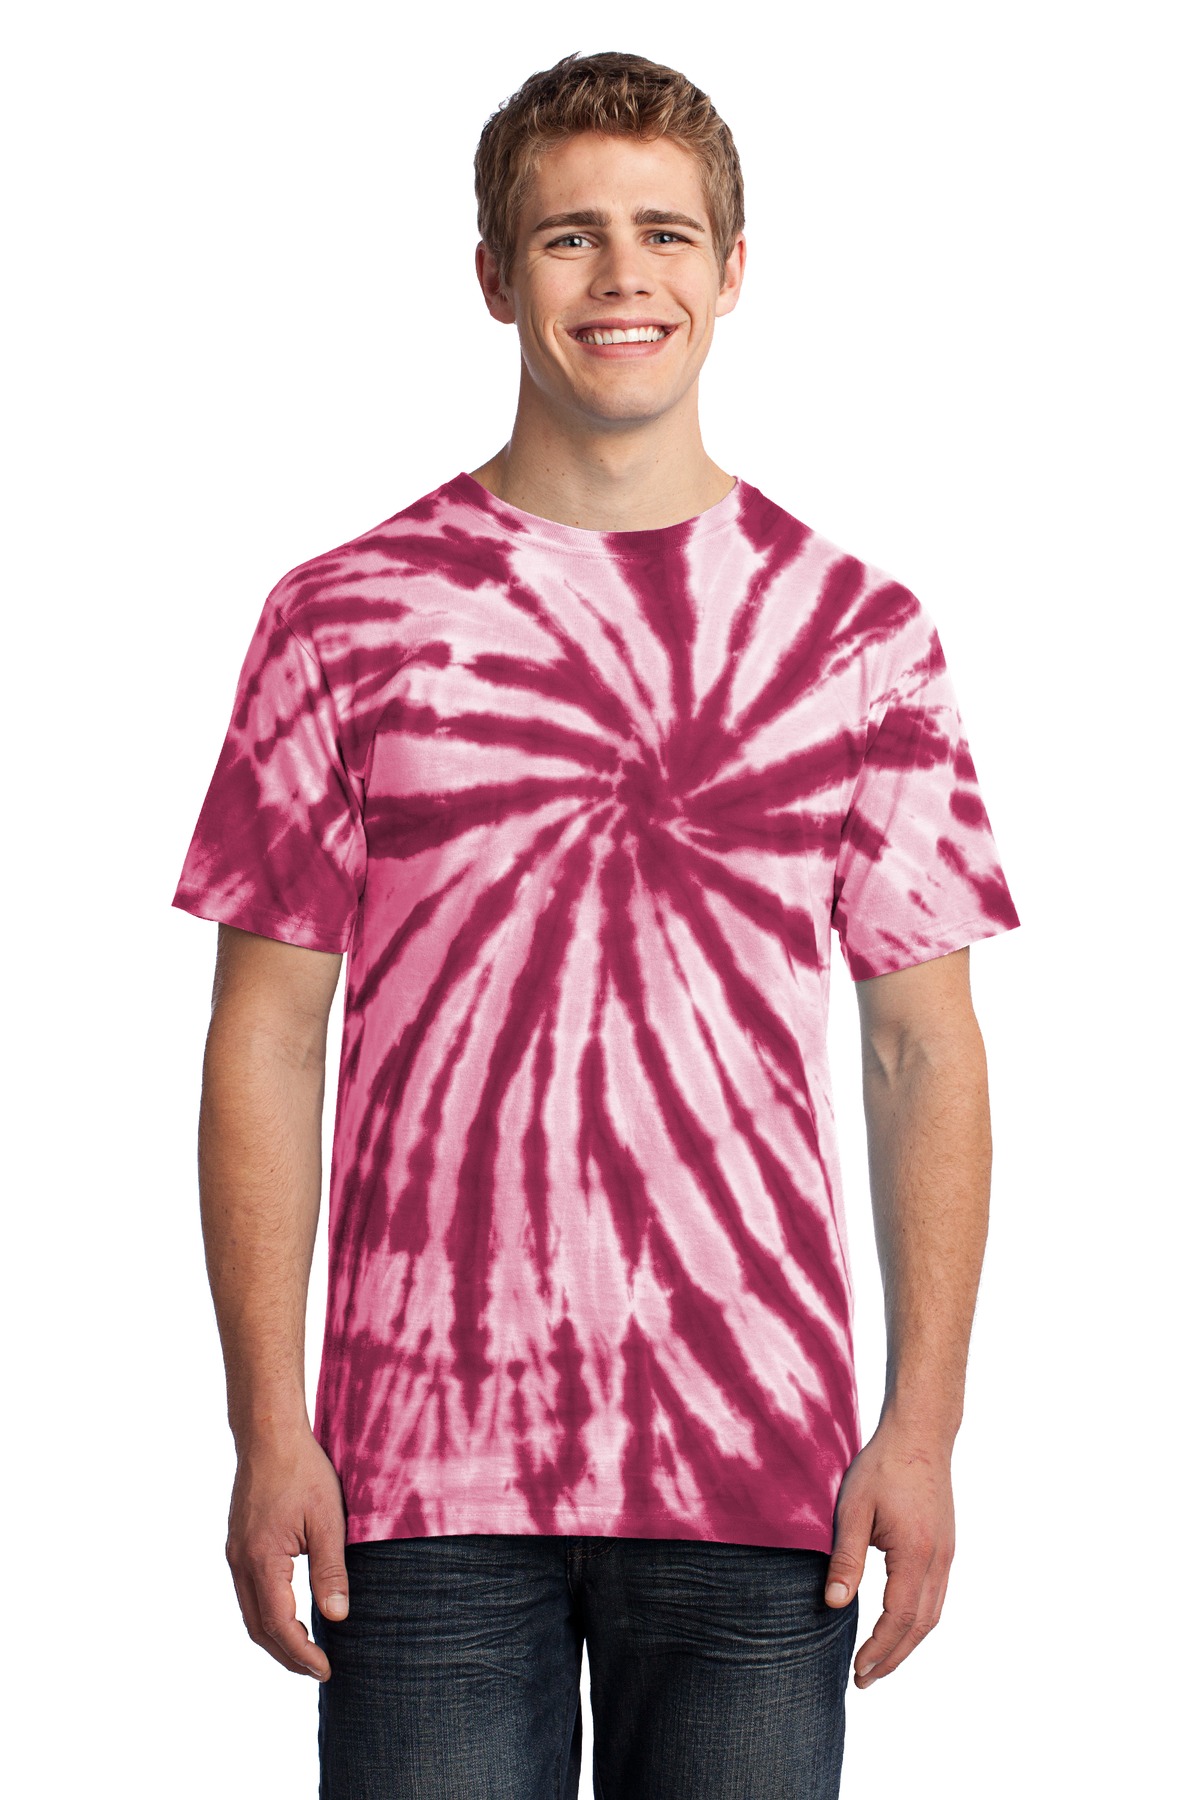 Port and Company - Tie-Dye Tee. PC147 100% Cotton T-Shirt